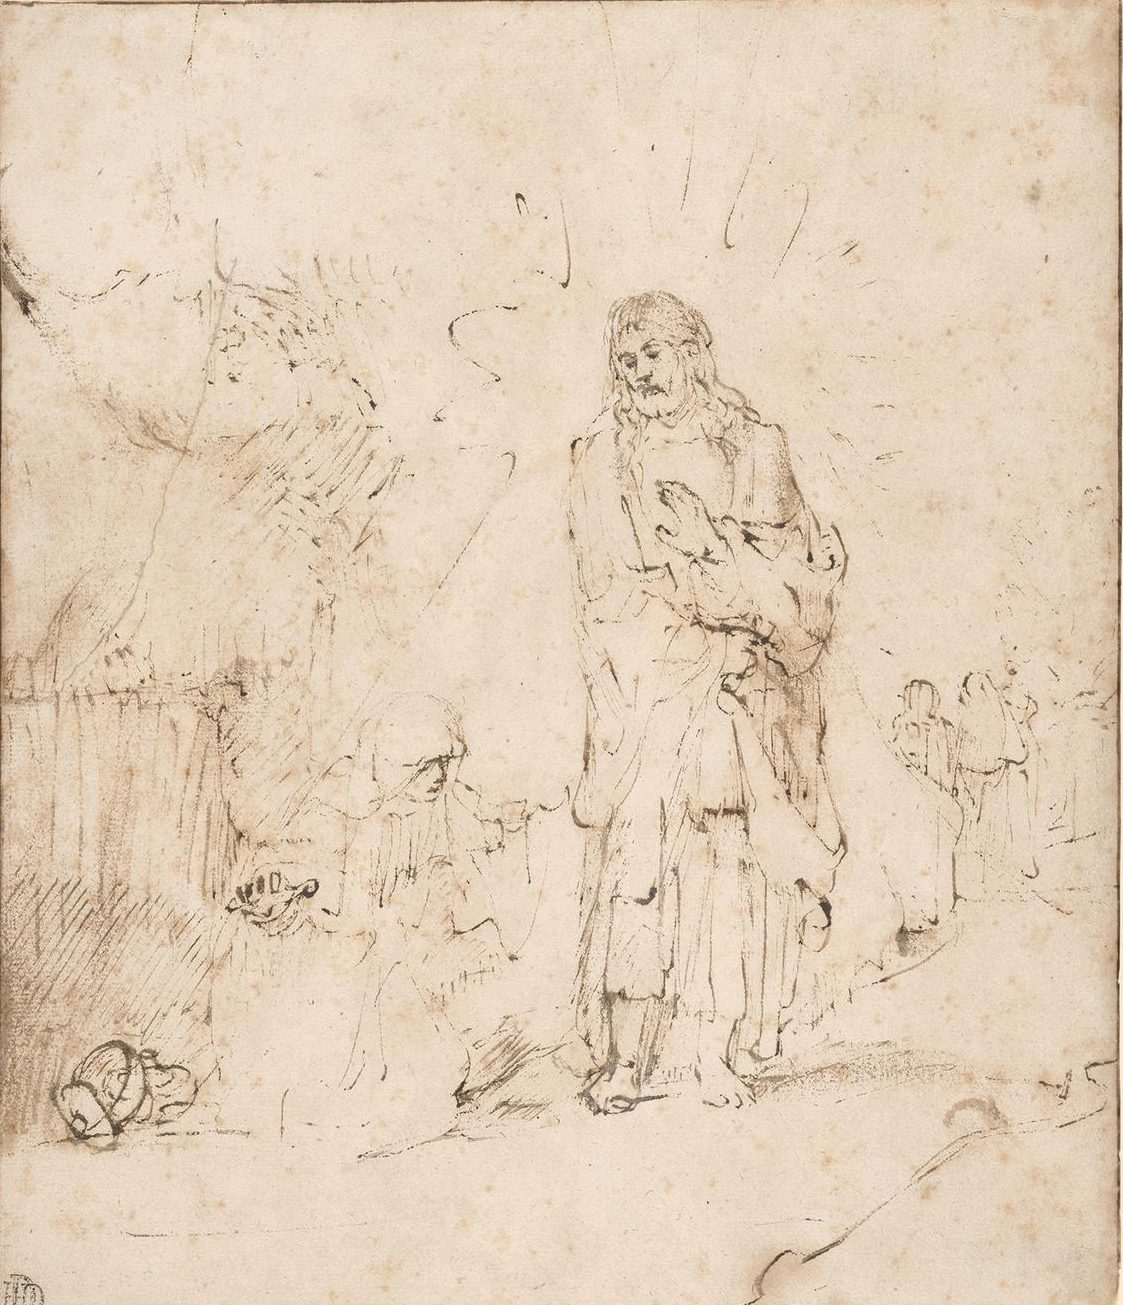 Rembrandt drawing of Jesus and a beggar